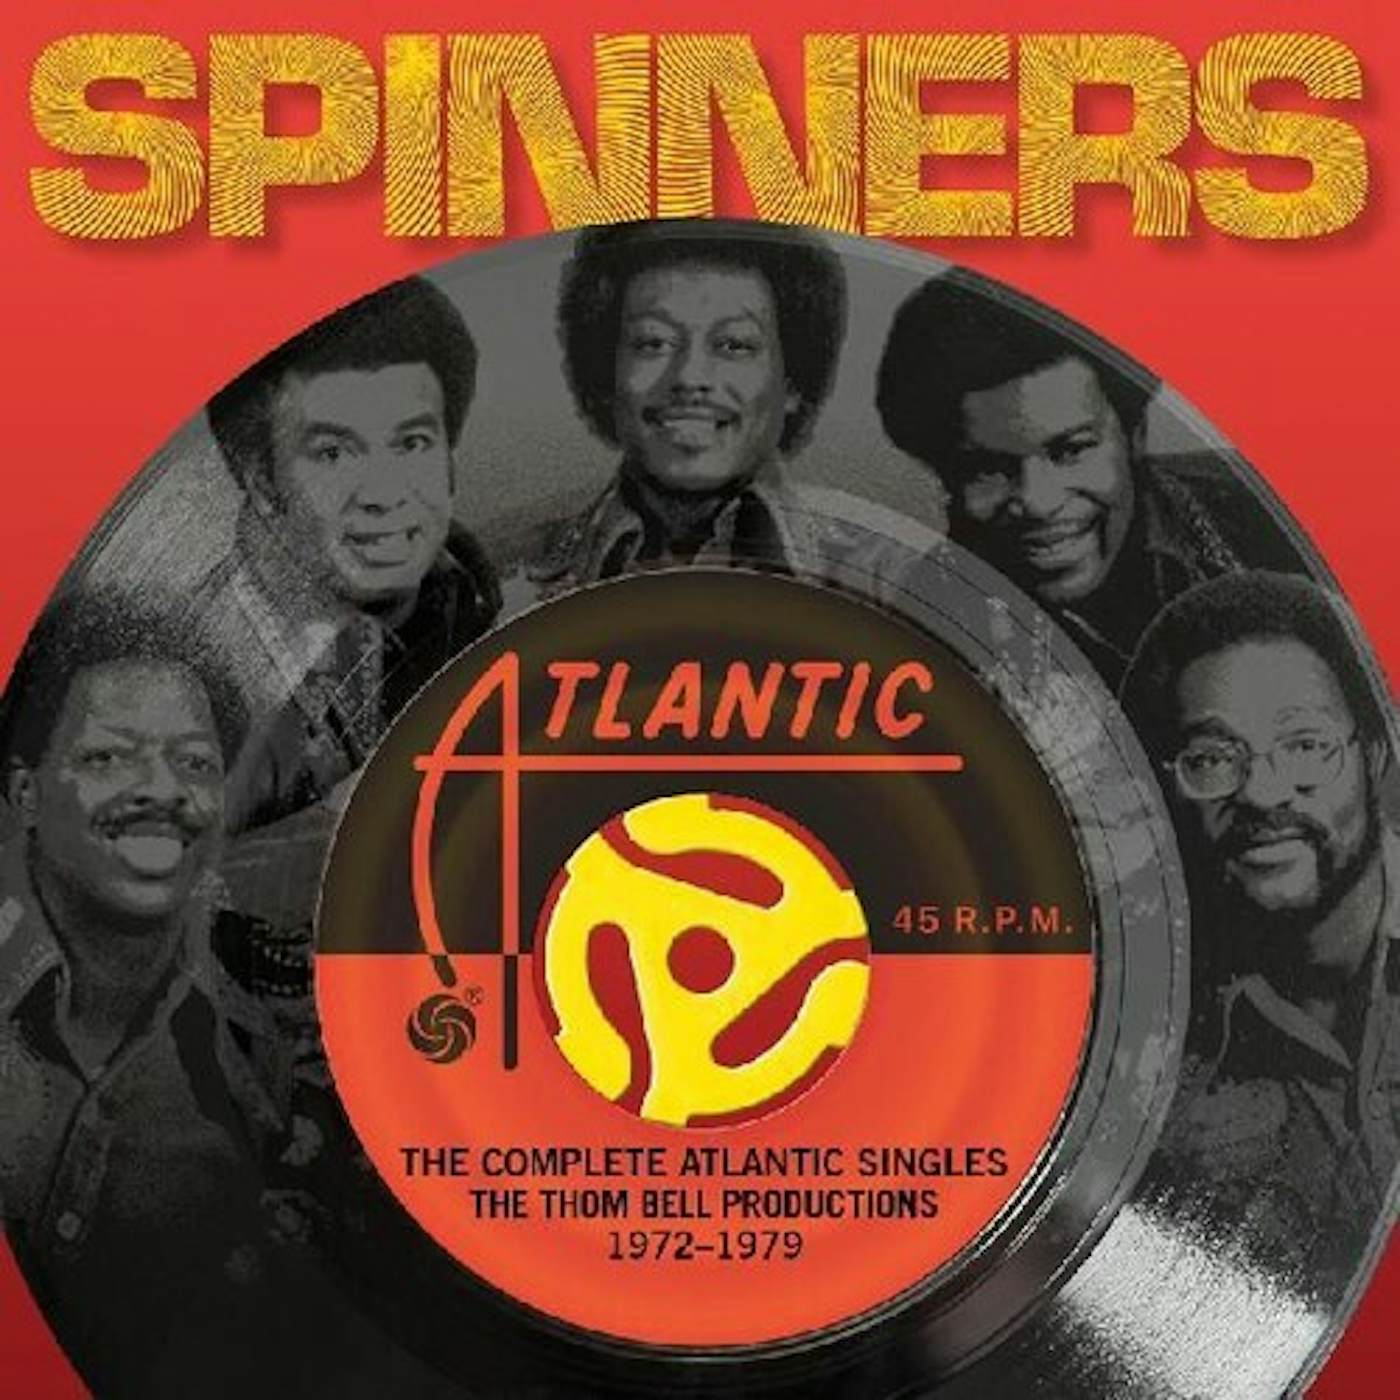 The Spinners Now Playing Vinyl Record